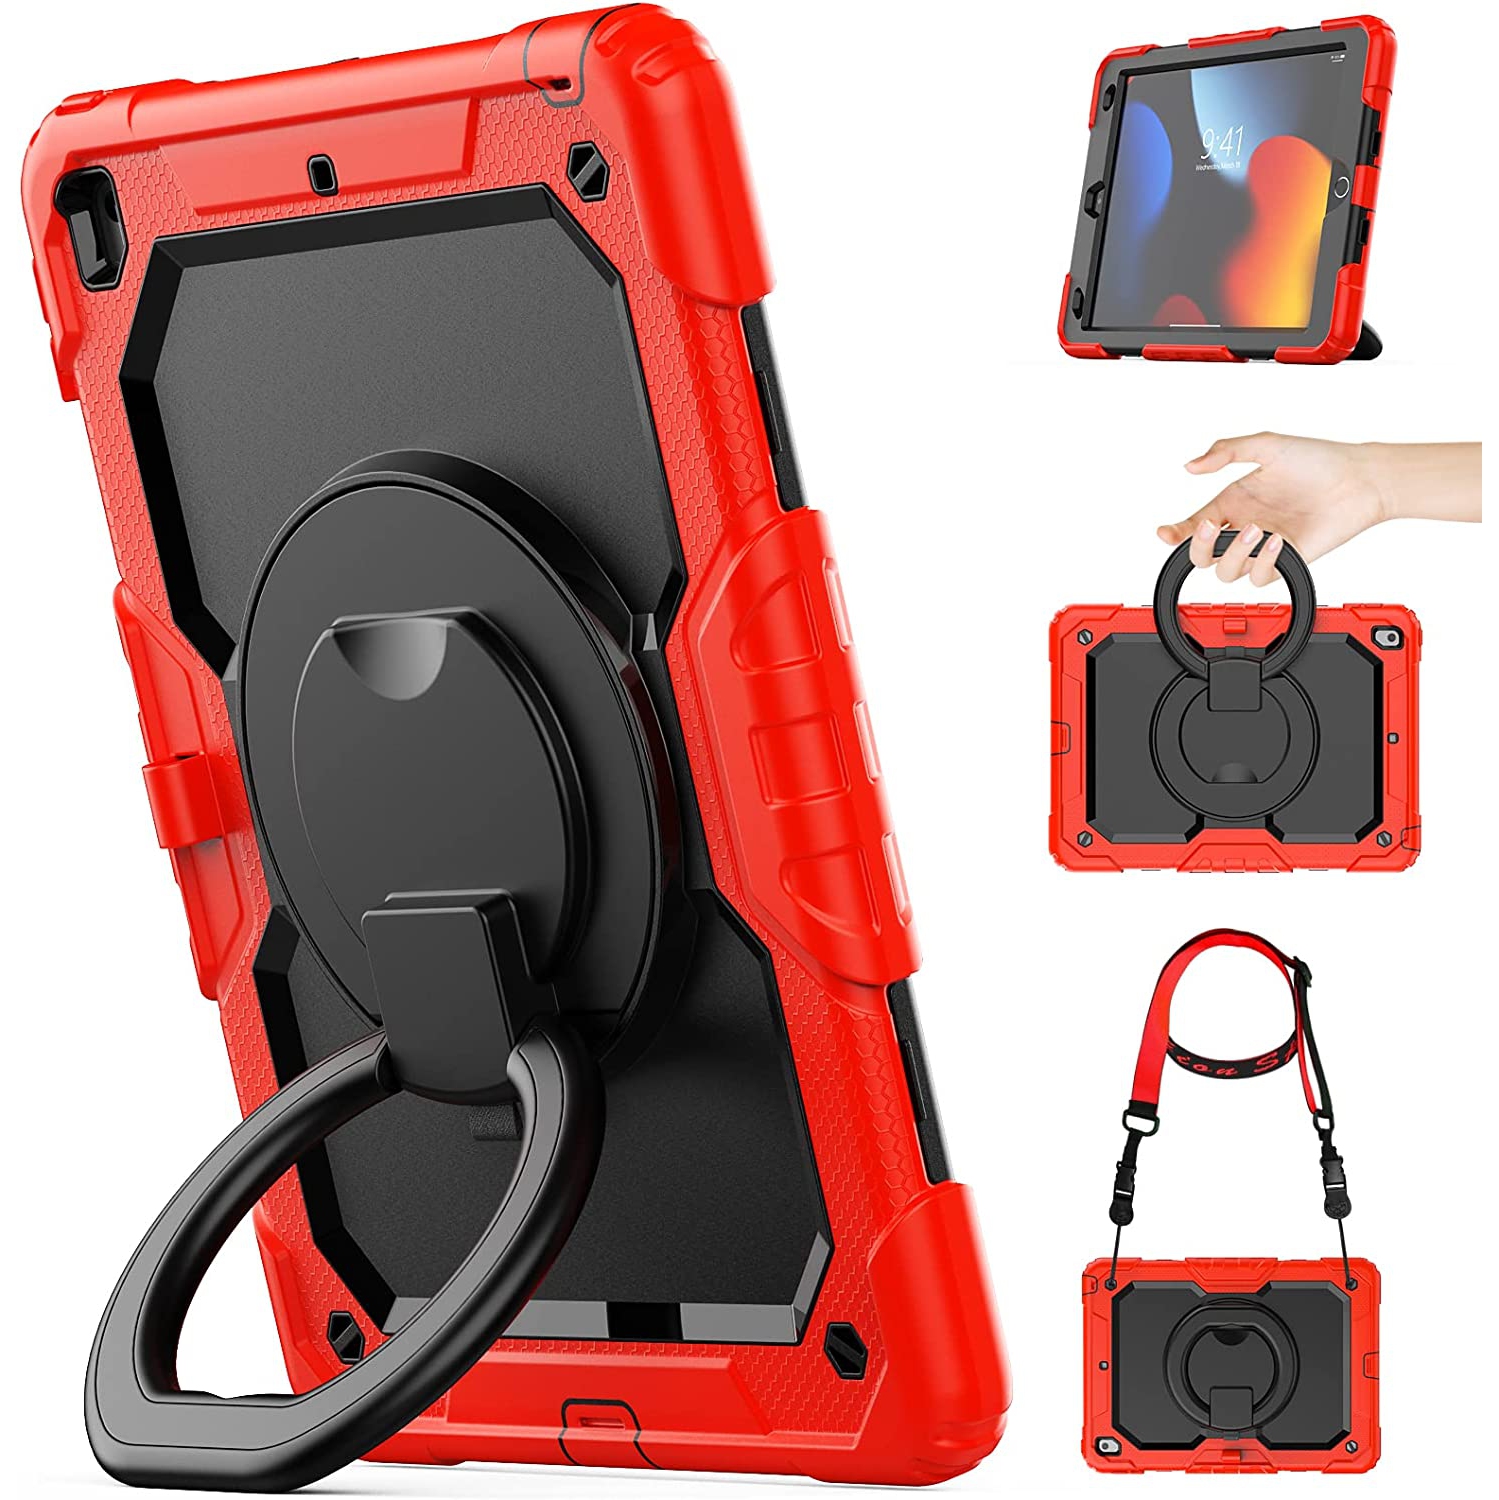 T Kids Case for iPad 9th/ 8th/ 7th Generation 2021/ 2020/ 2019, Durable Shockproof Protective Case with Screen Protector, 360° Rotating Kickstand and Shoulder Strap for iPad 10.2 C